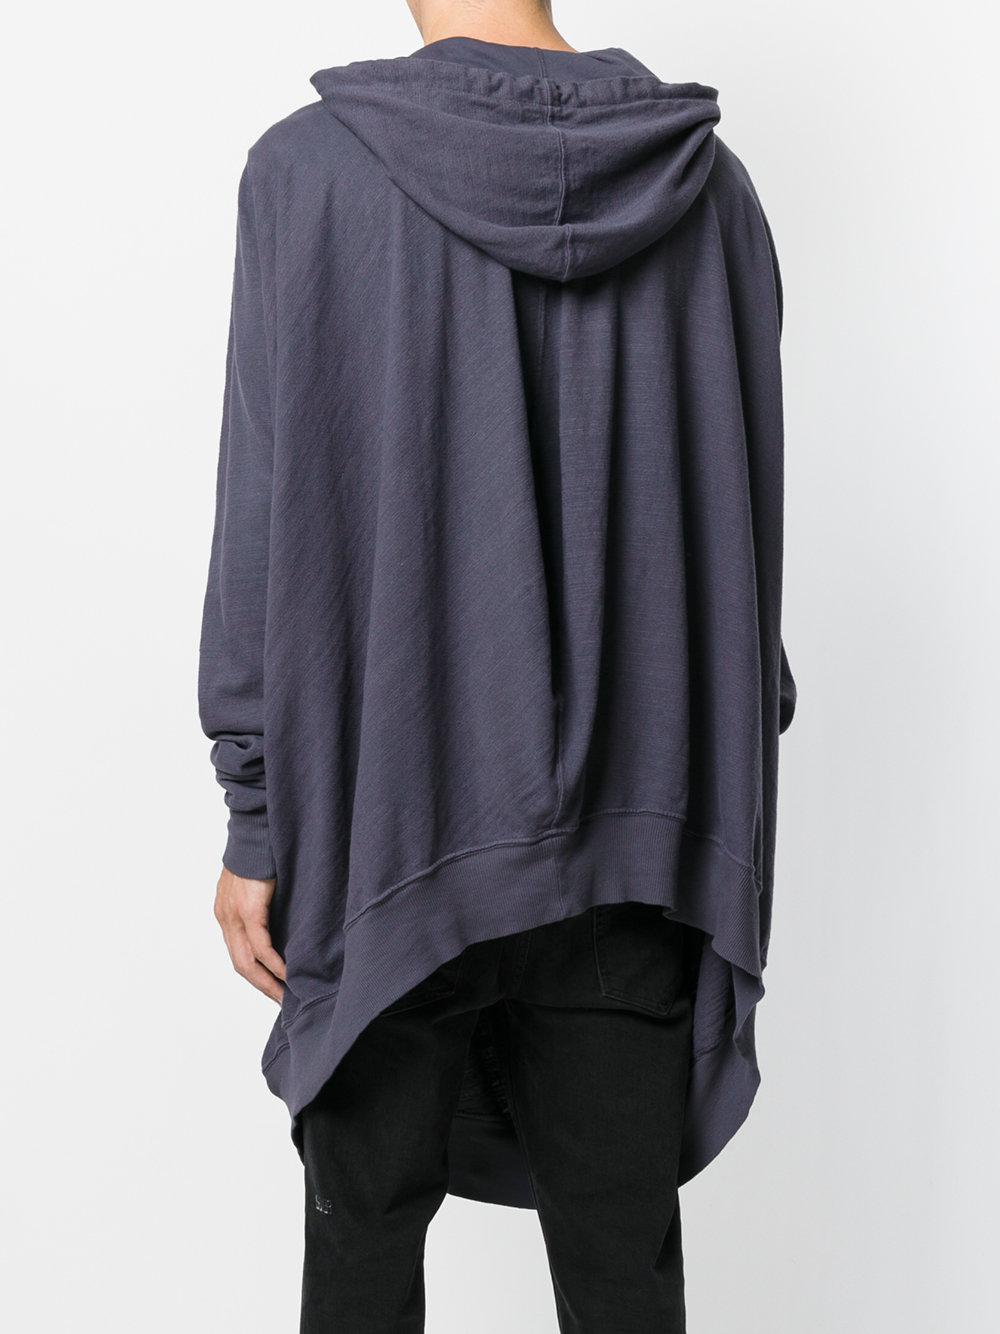 Rick Owens DRKSHDW Cotton Oversized Draped Hoodie in Grey (Gray 